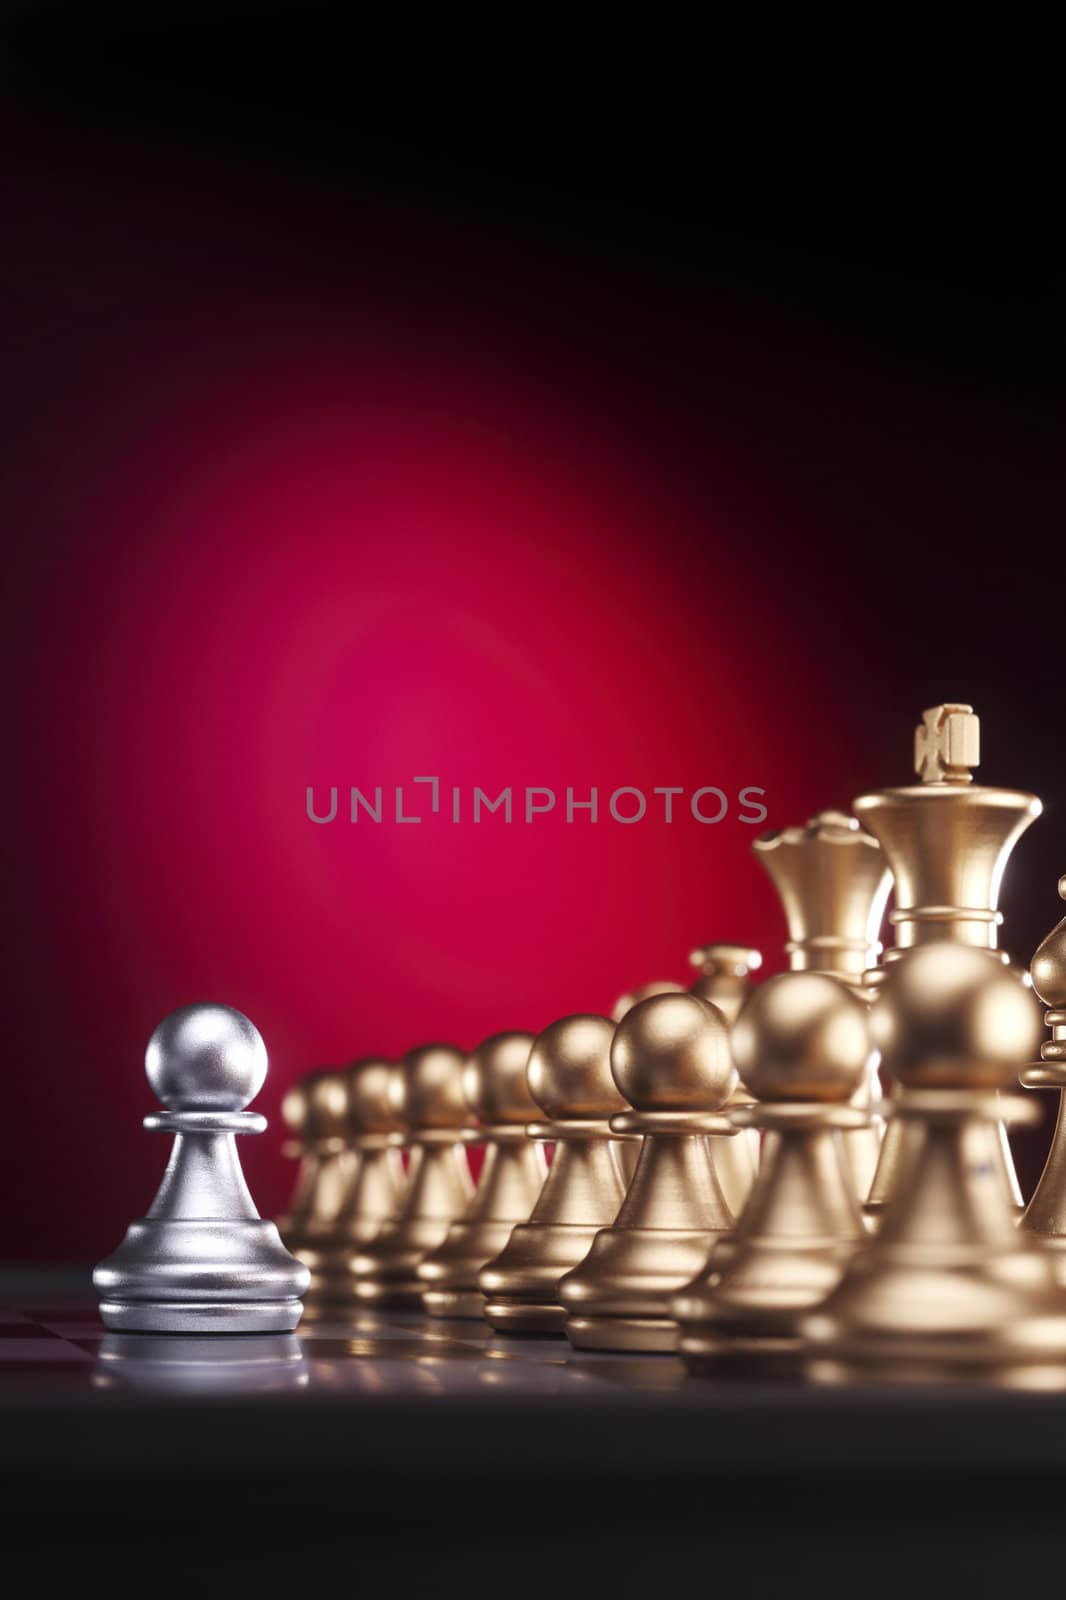 stock image of the battle of the chess game